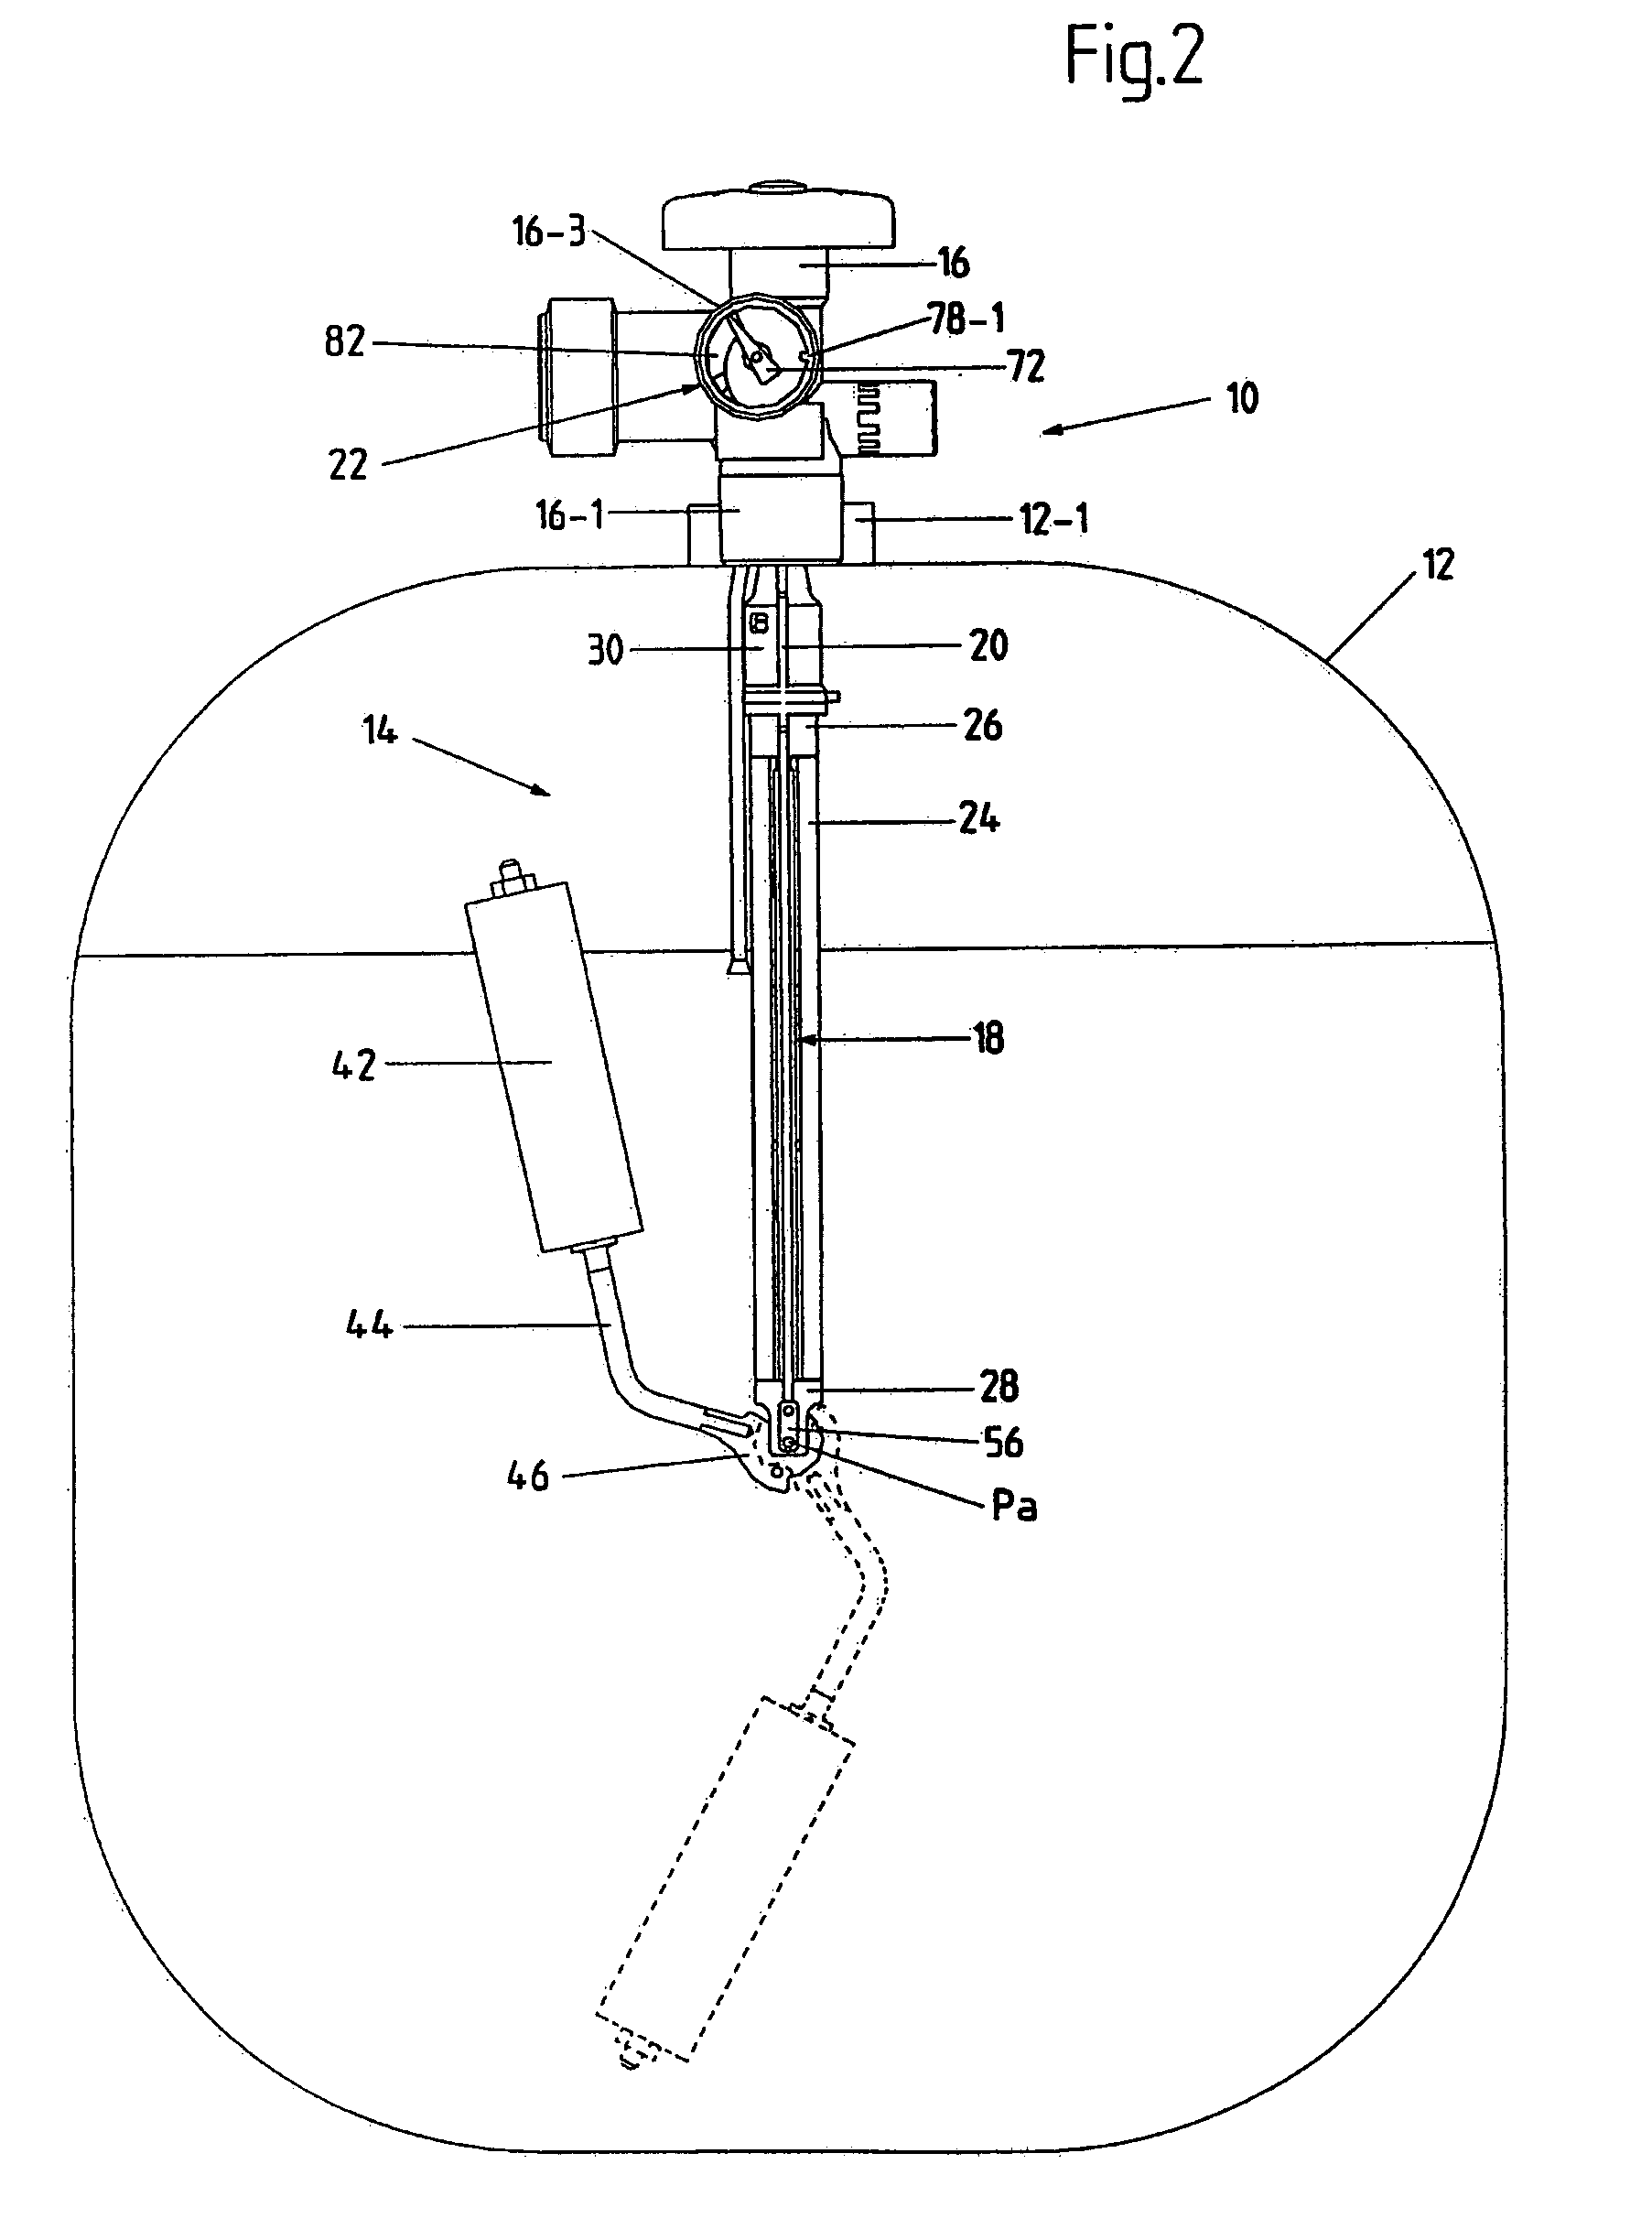 Tap assembly for a liquid vessel having an overfill protection device and a float controlled magnetic level gauge